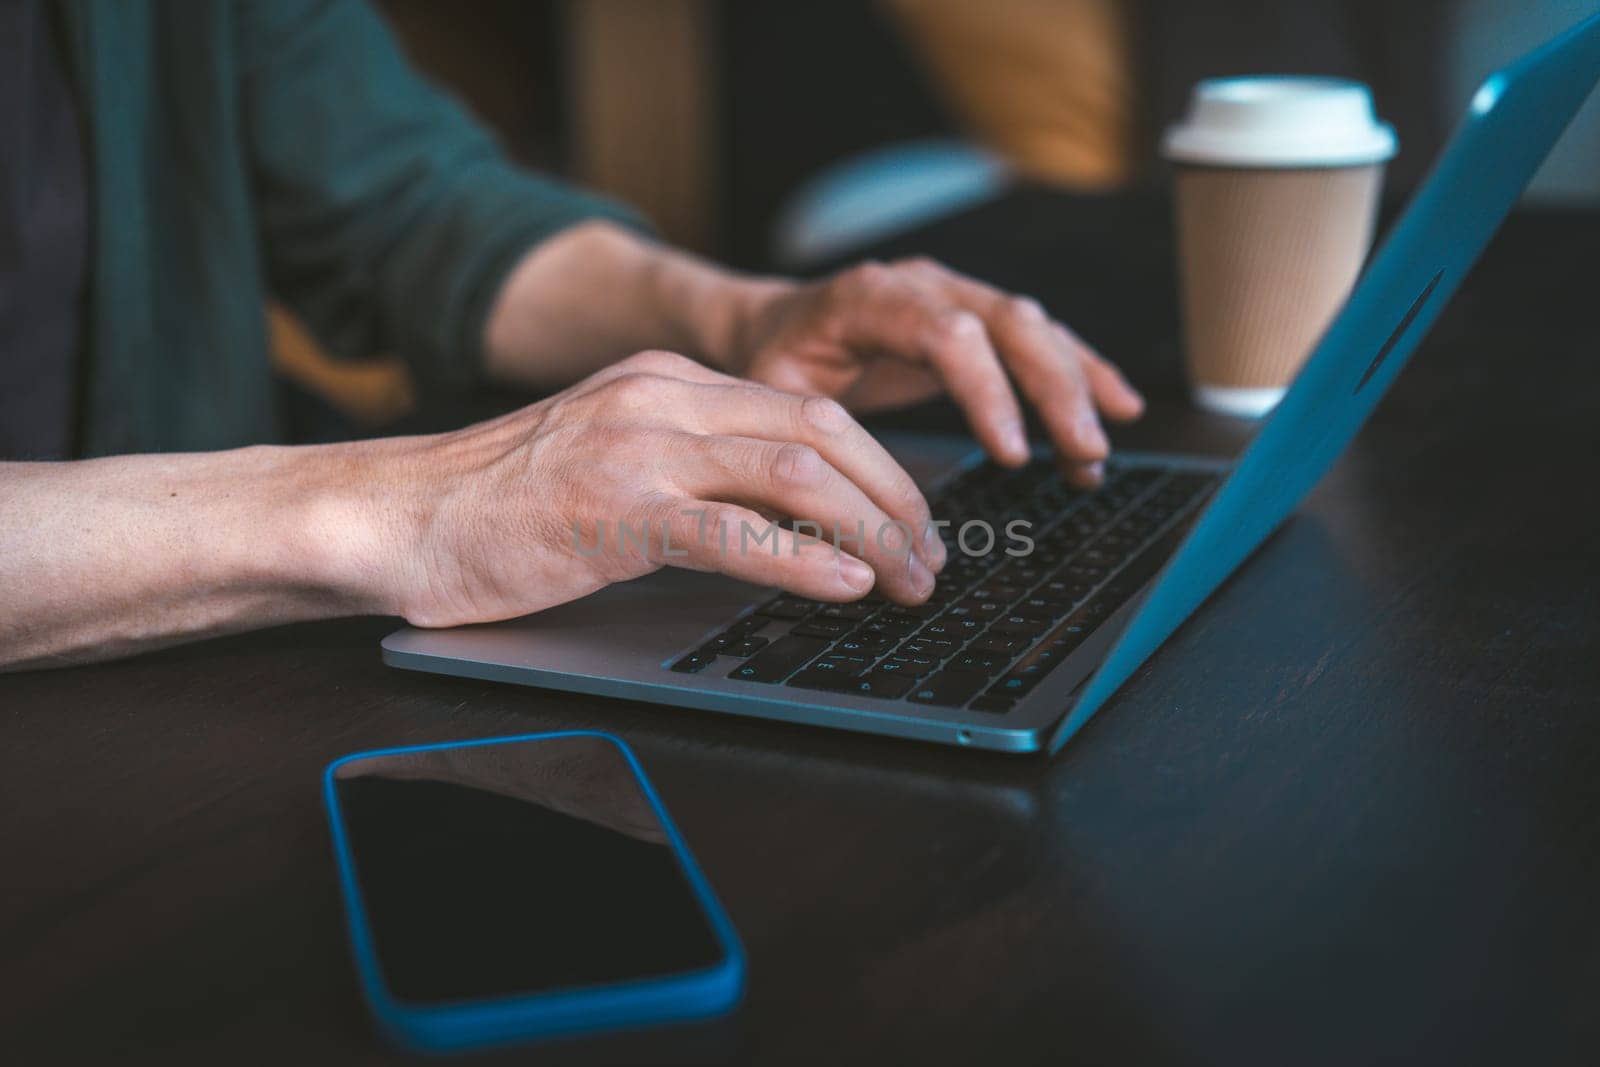 Close-up of man's hands typing text message on laptop keyboard. Work-from-home setup and modern communication technology. The man focused on task, with laptop screen out of focus in the background. High quality photo